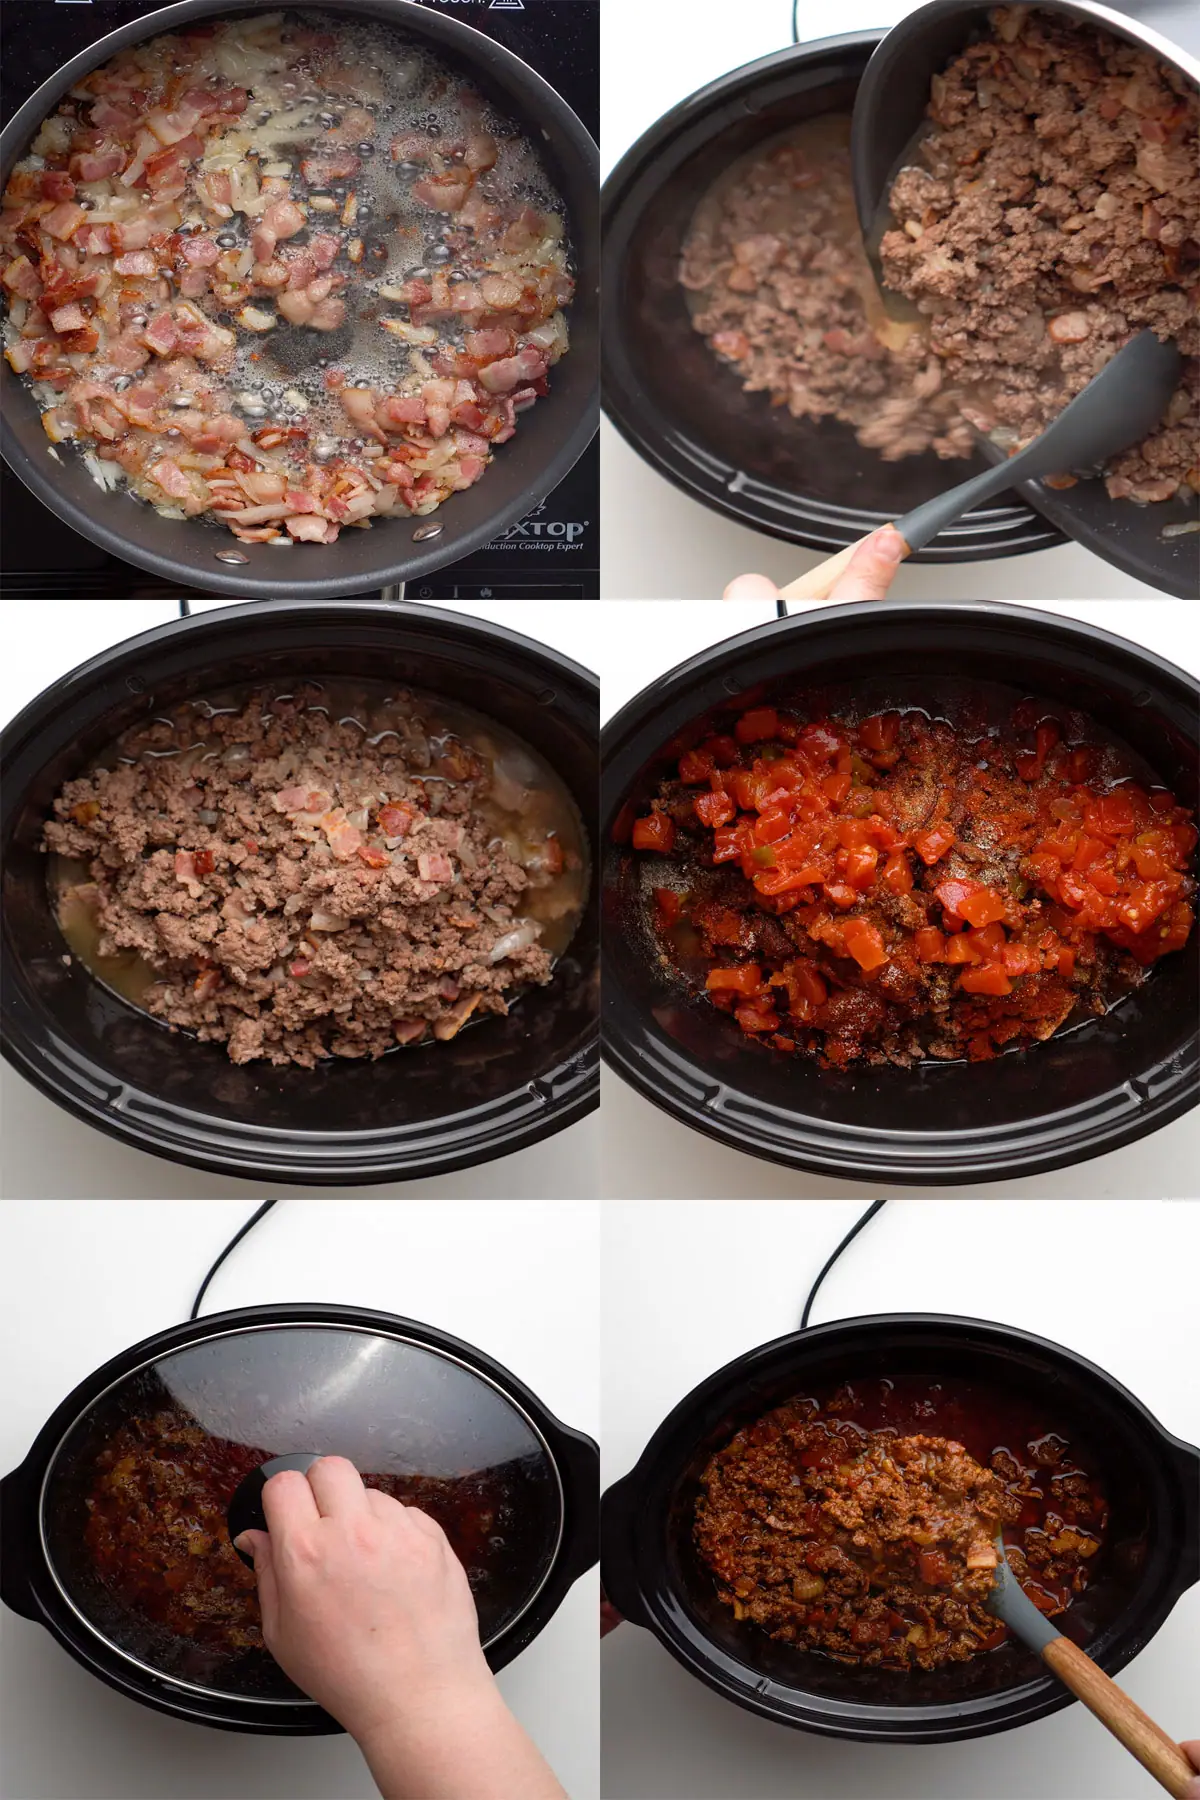 Collage of each step in the chili making process in a Crockpot slow cooker.